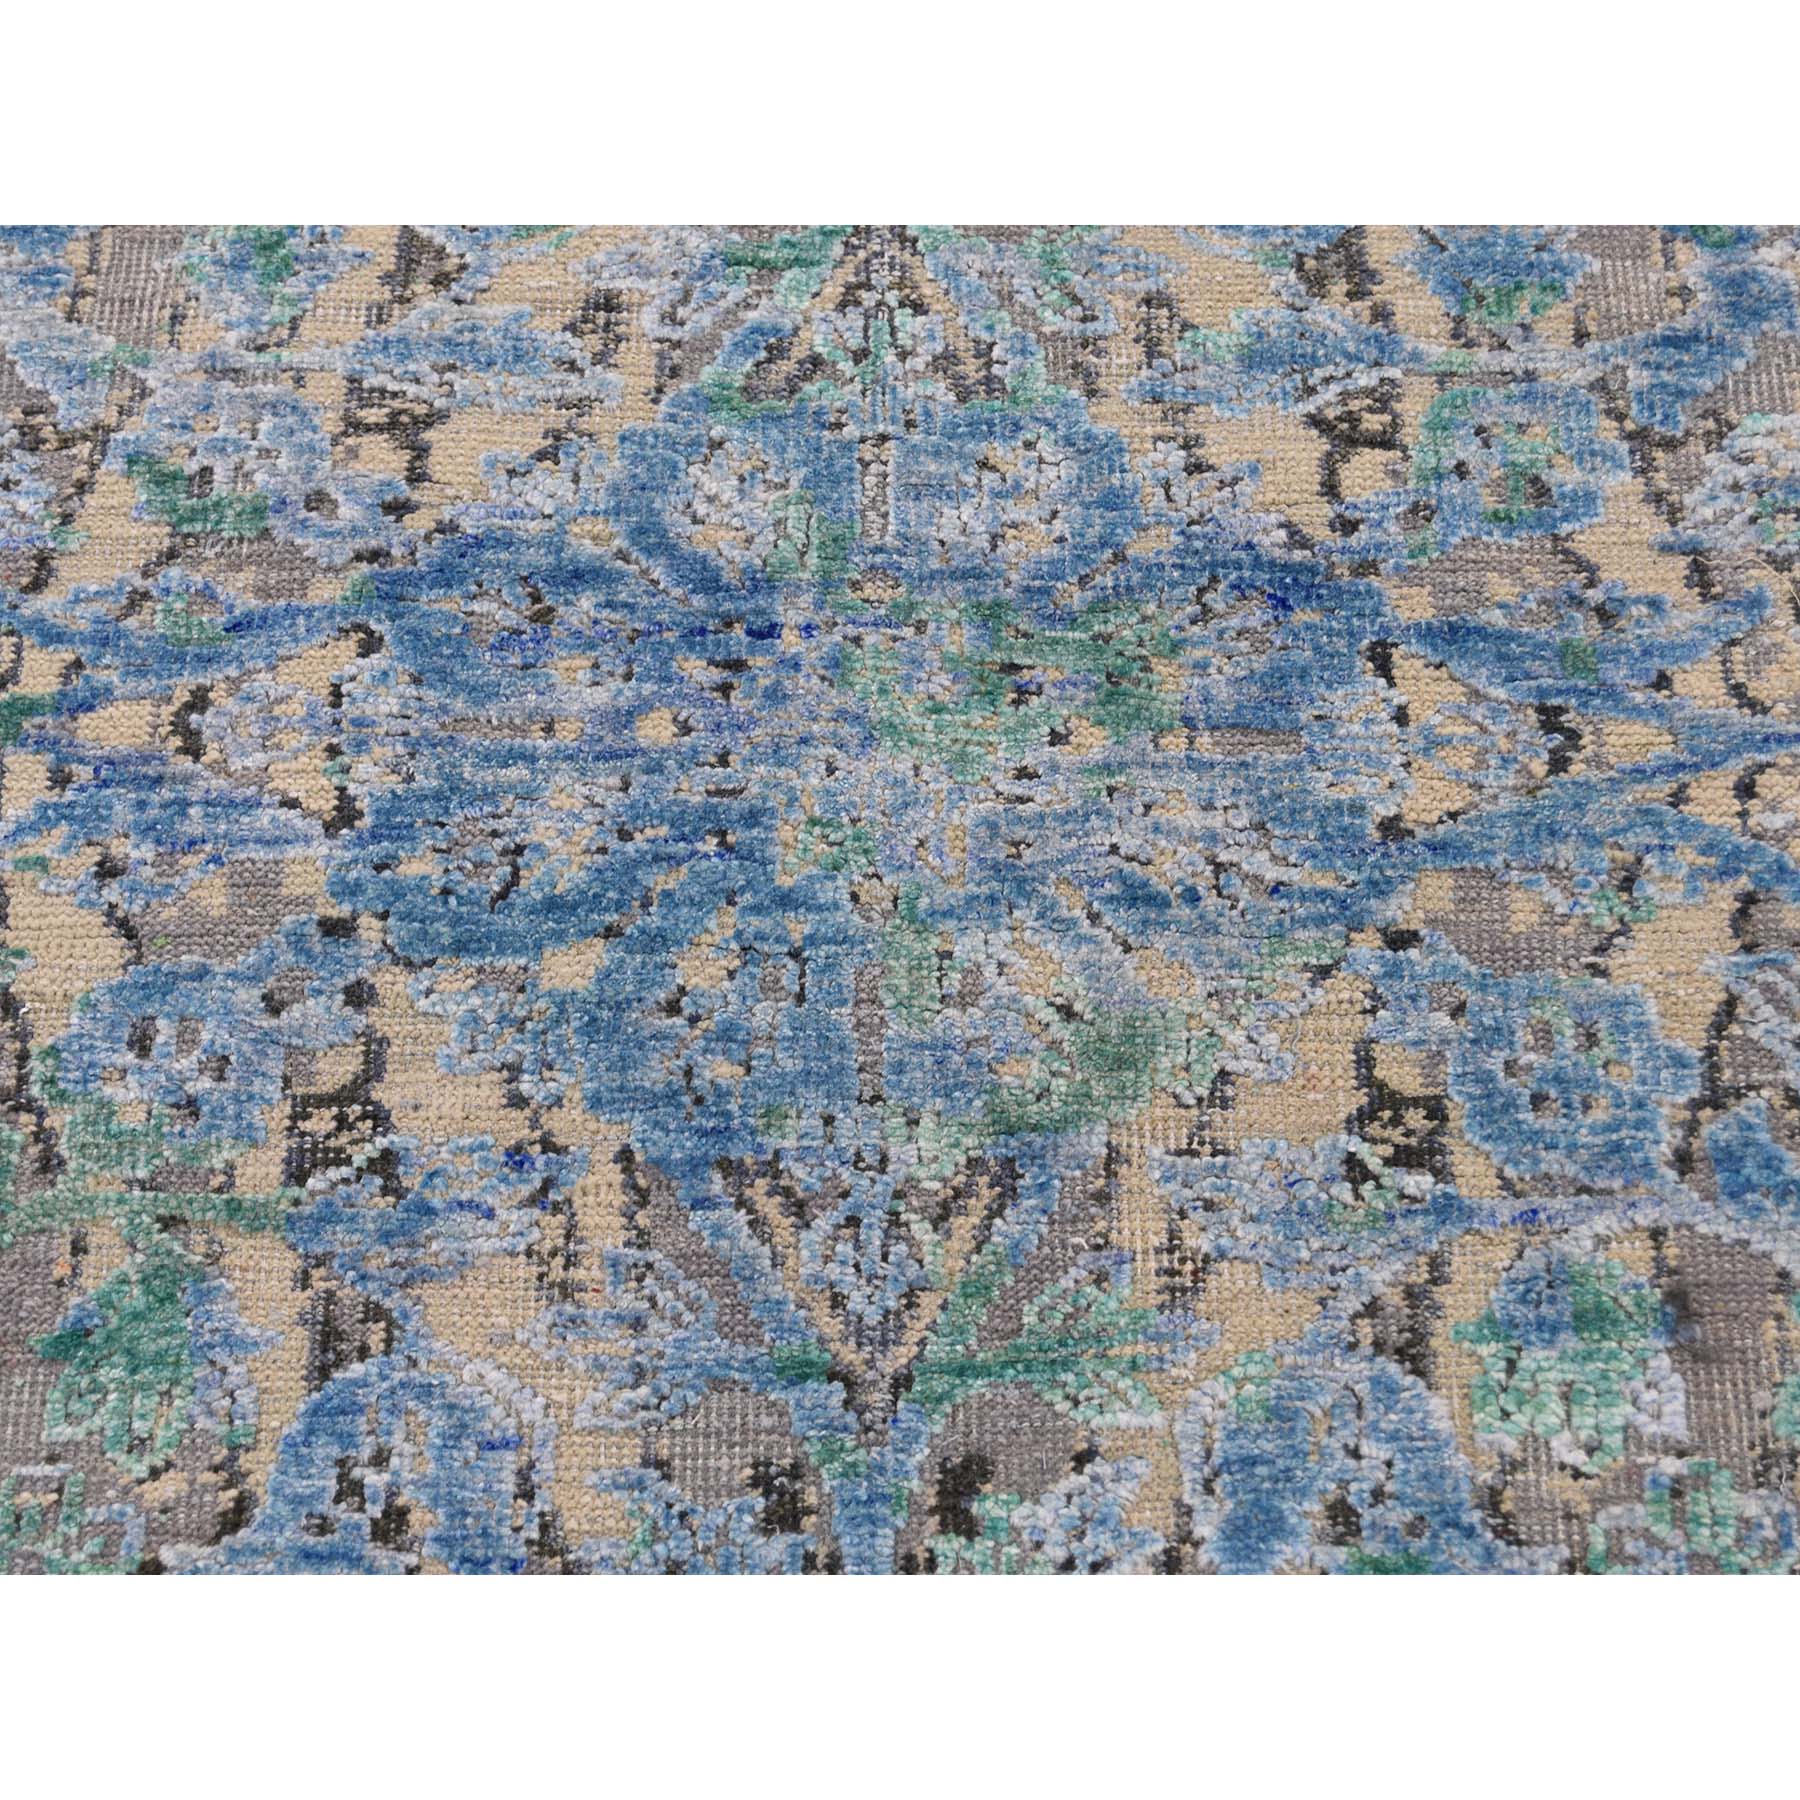 7-10 x10- THE WATER LILIES Silk With Oxidized Wool Hand-Knotted Oriental Rug 